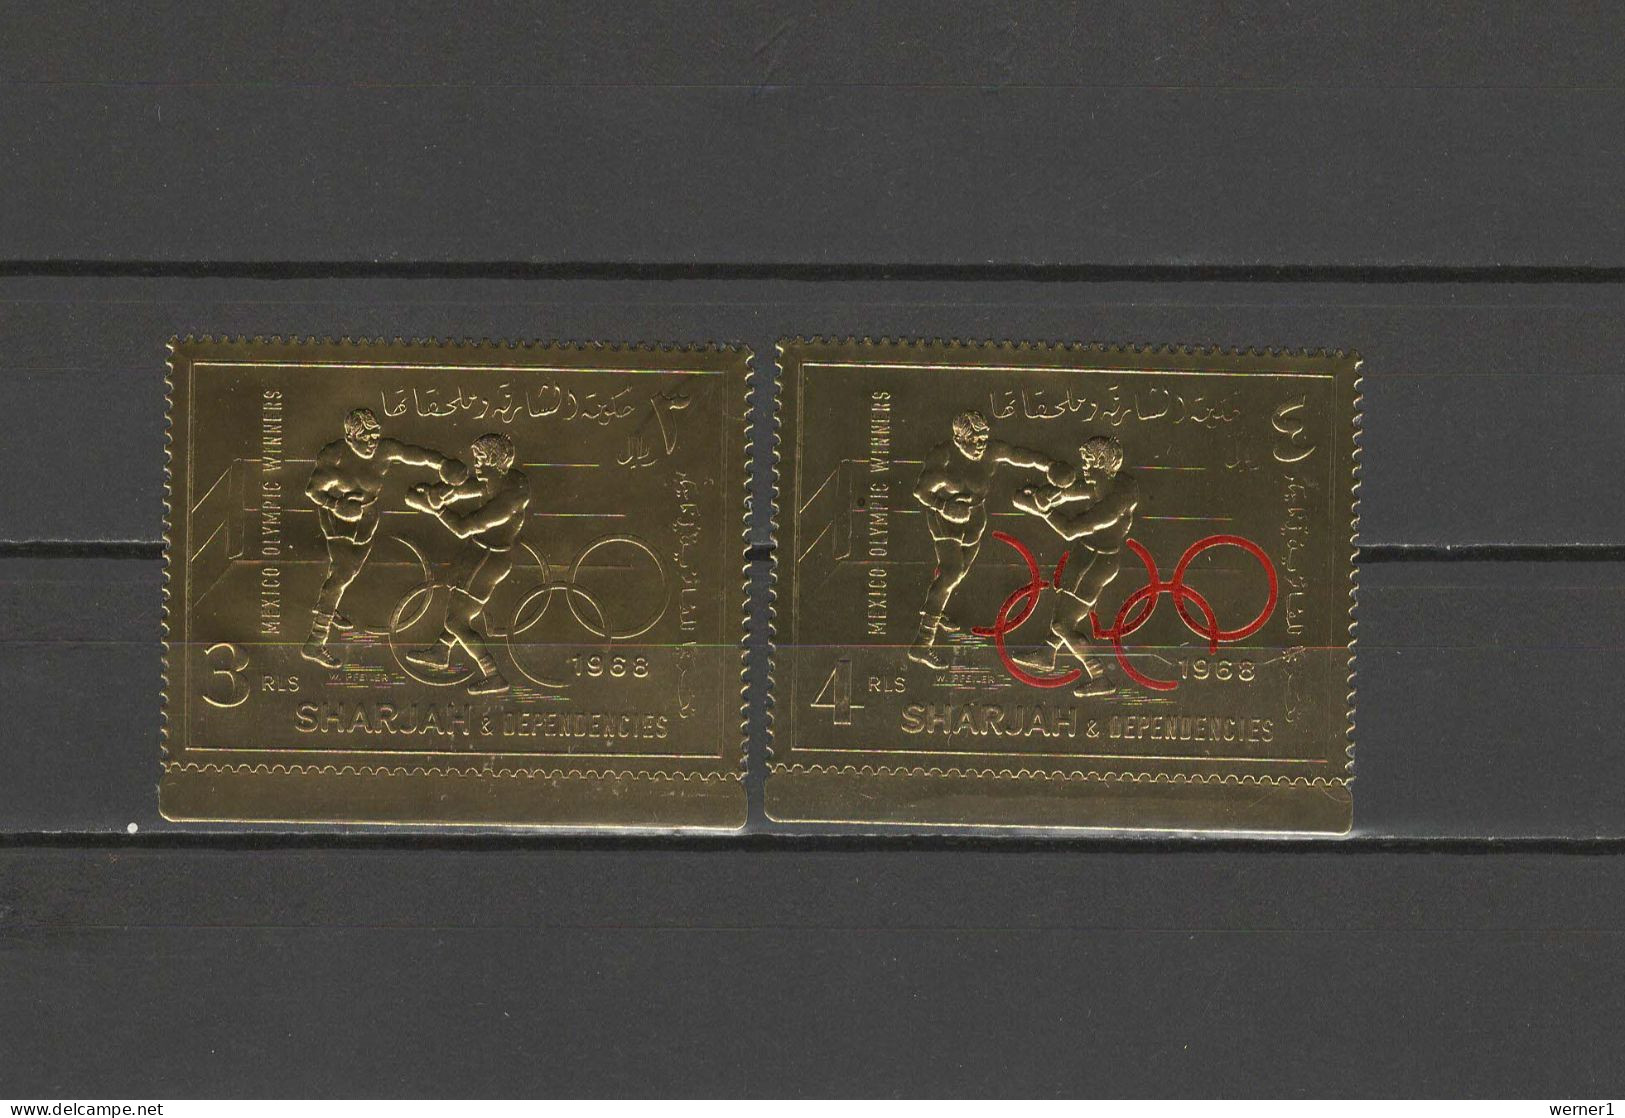 Sharjah 1968 Olympic Games Mexico, Boxing 2 Gold Stamps MNH - Summer 1968: Mexico City